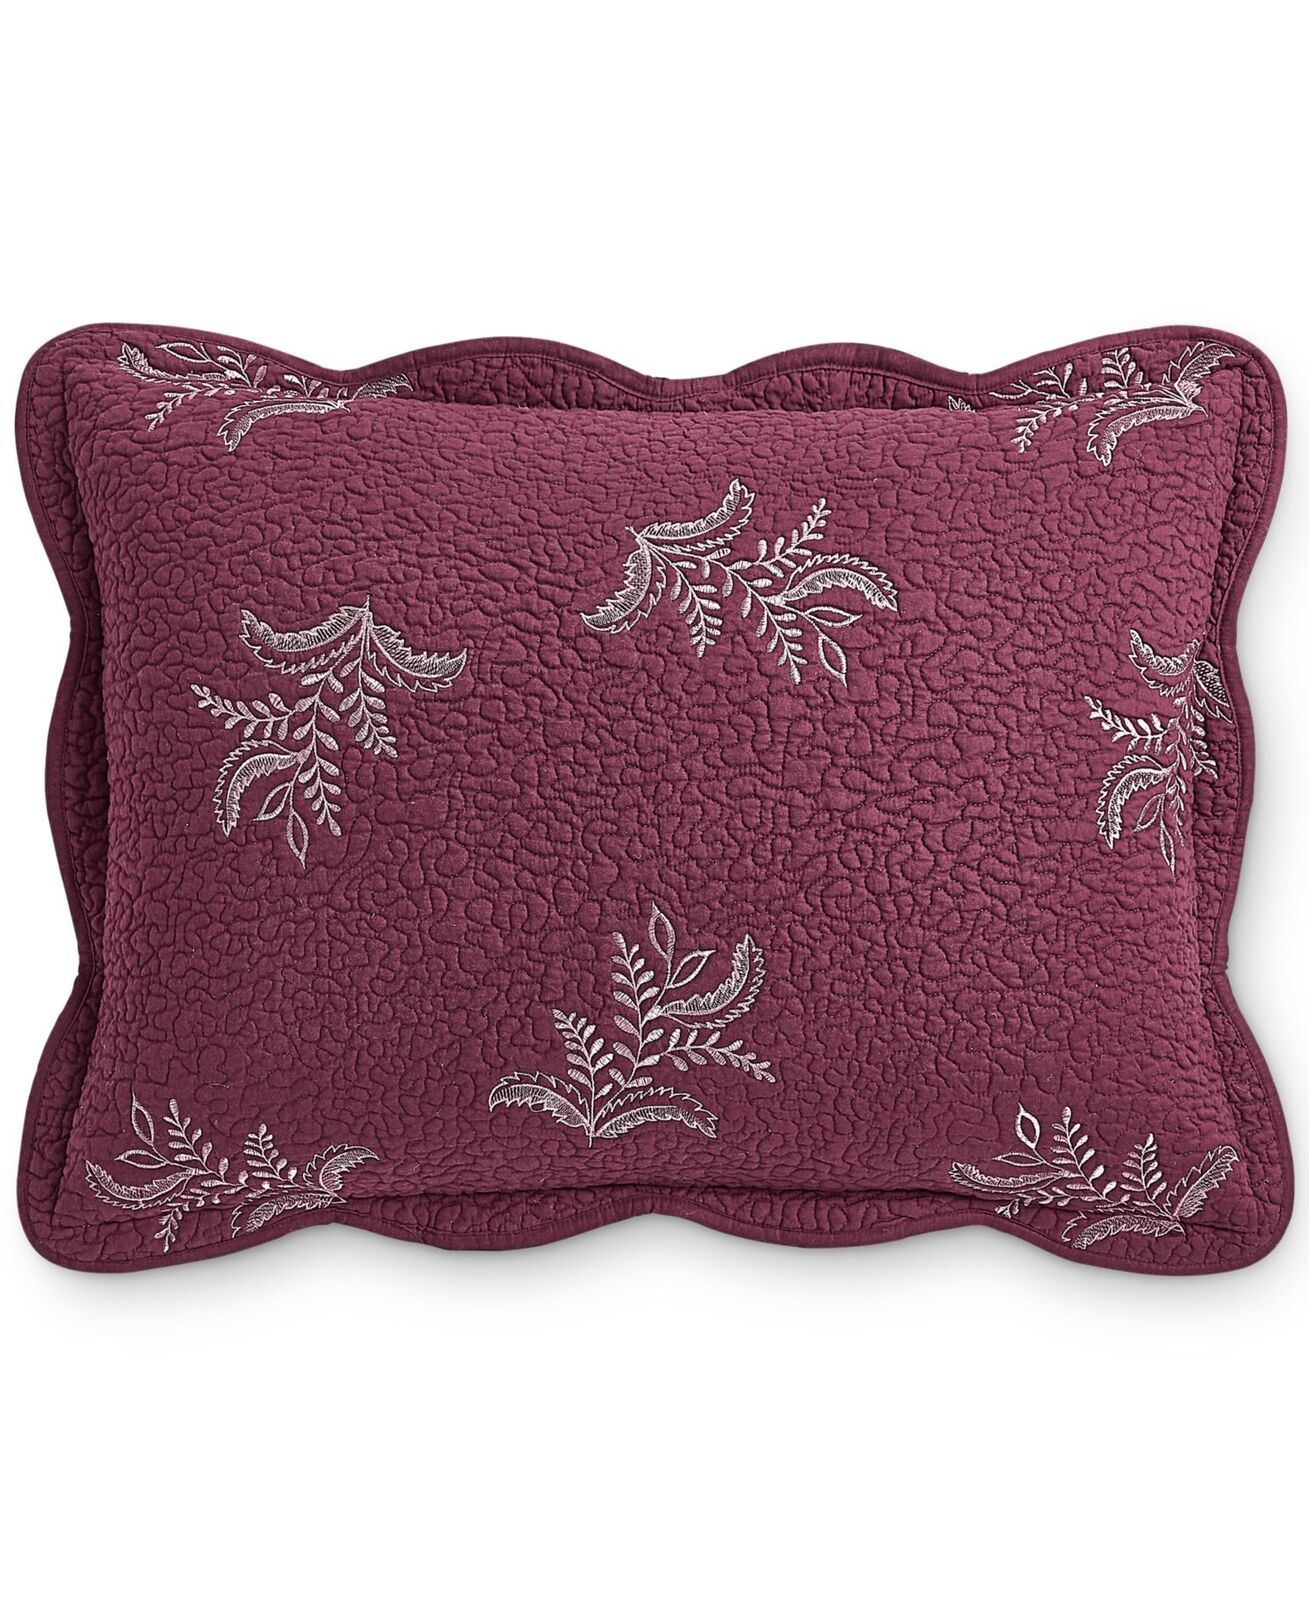 Primary image for Martha Stewart Collection Stenciled Leaves Sham Standard